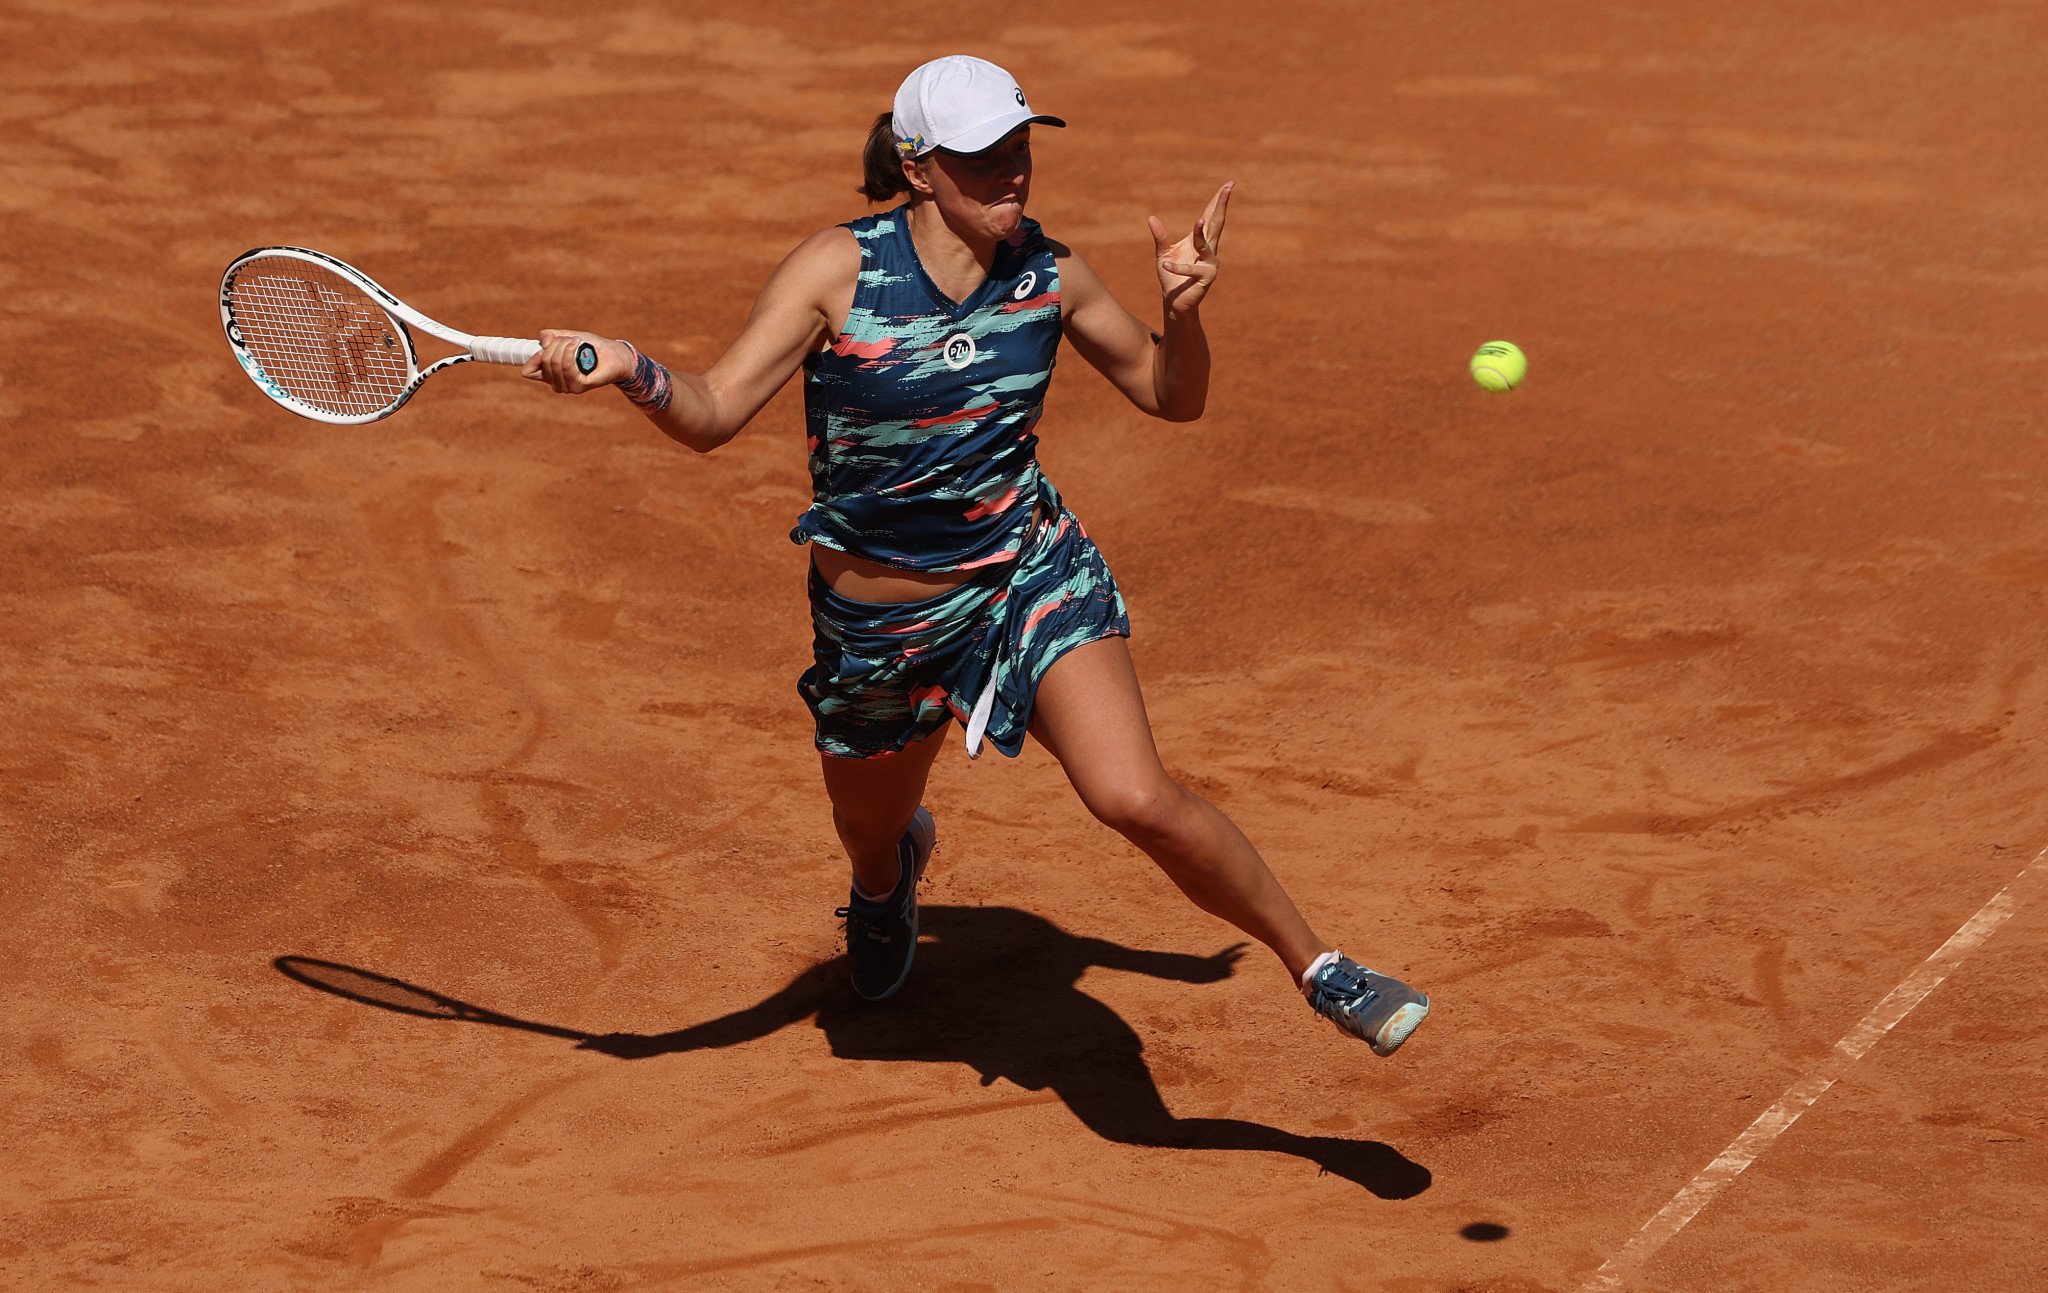 Iga Świątek won a 26th consecutive match on the WTA Tour as she reached the last four at the Foro Italico ©Getty Images